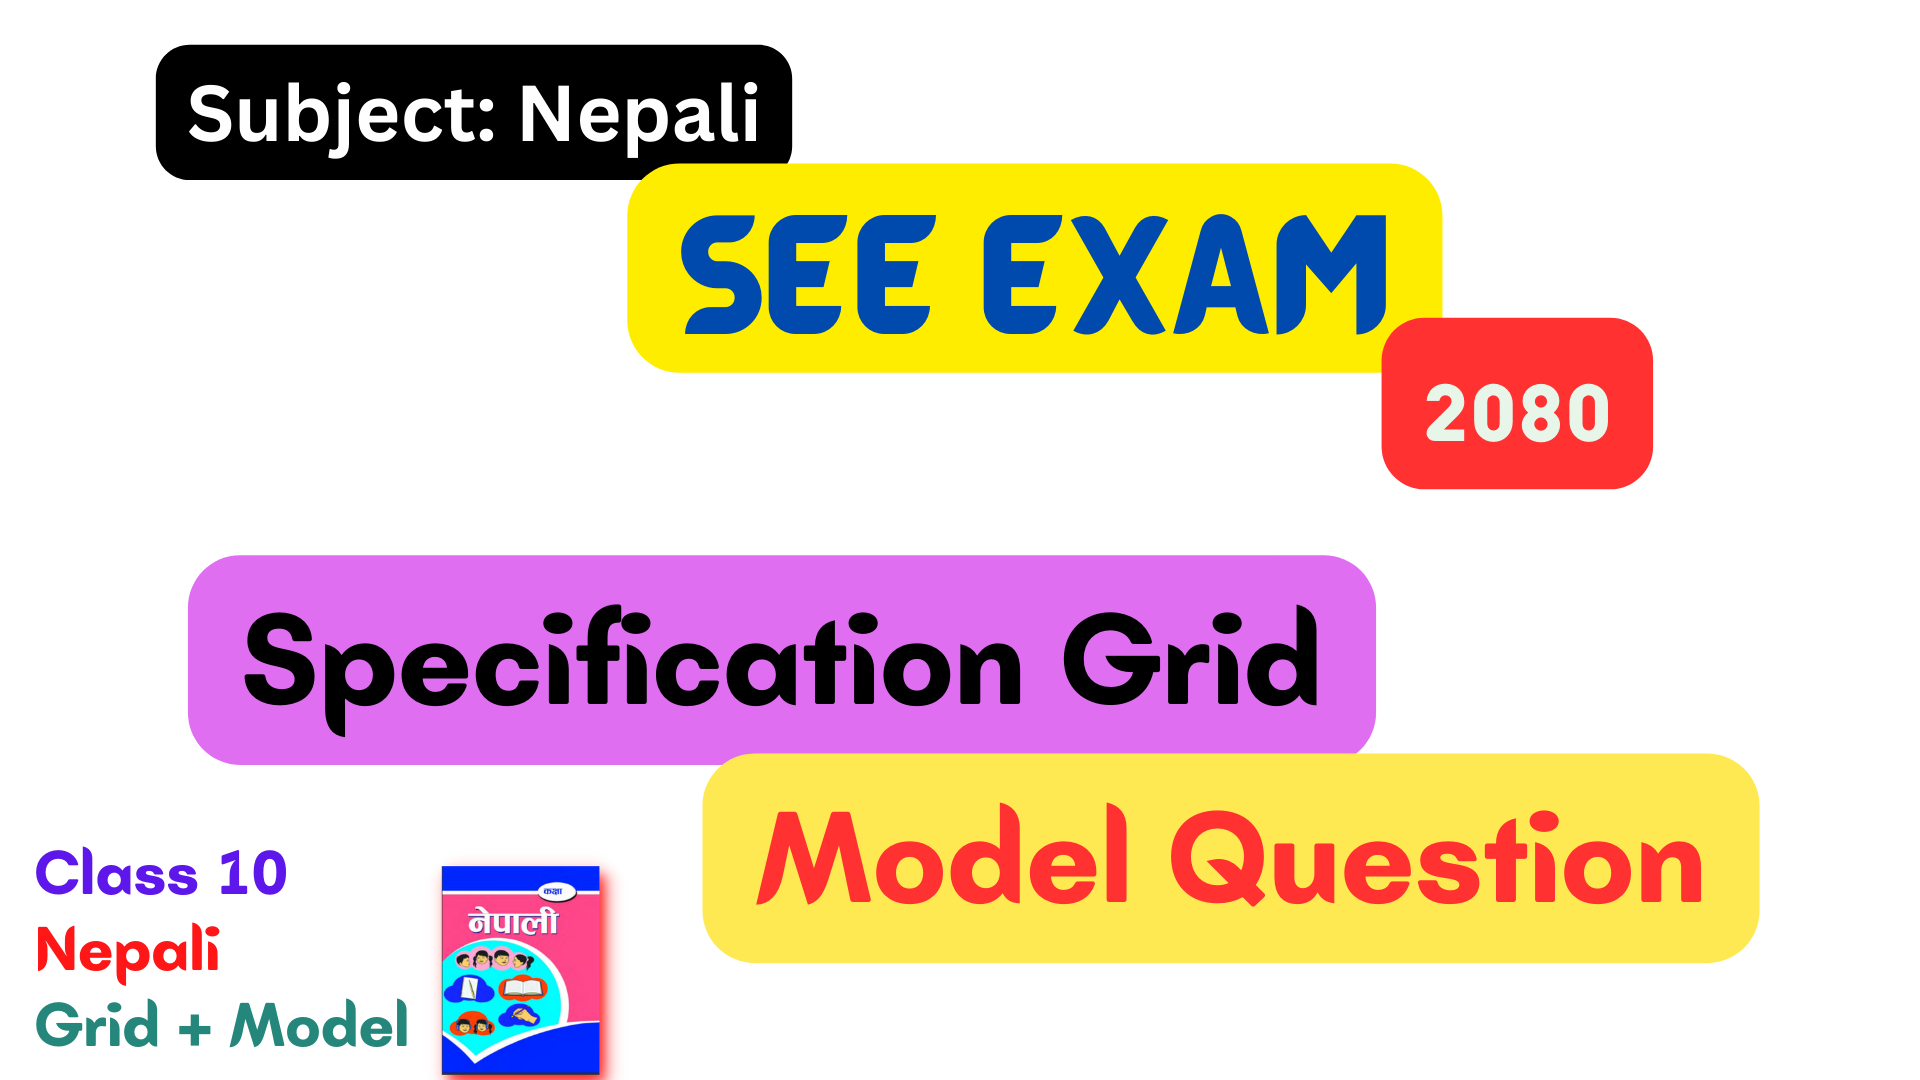 SEE Class 10 Nepali Specification Grid and Model Question 2080